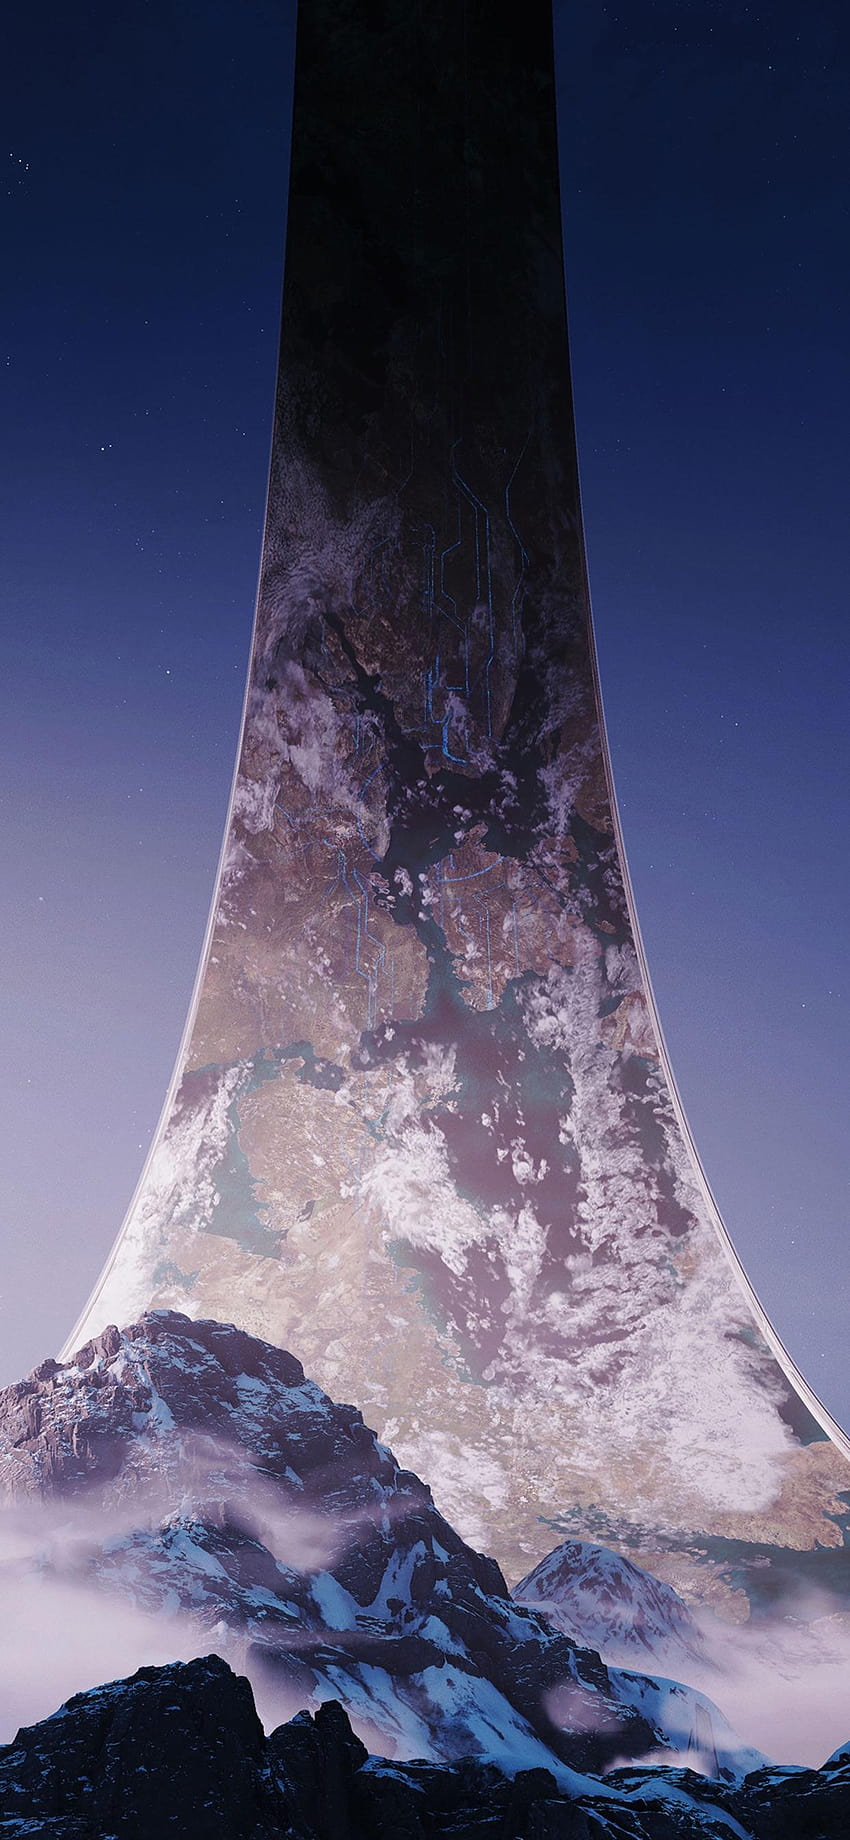 Looking for neat Halo for the iPhone XS Max, st johns iphone HD phone wallpaper